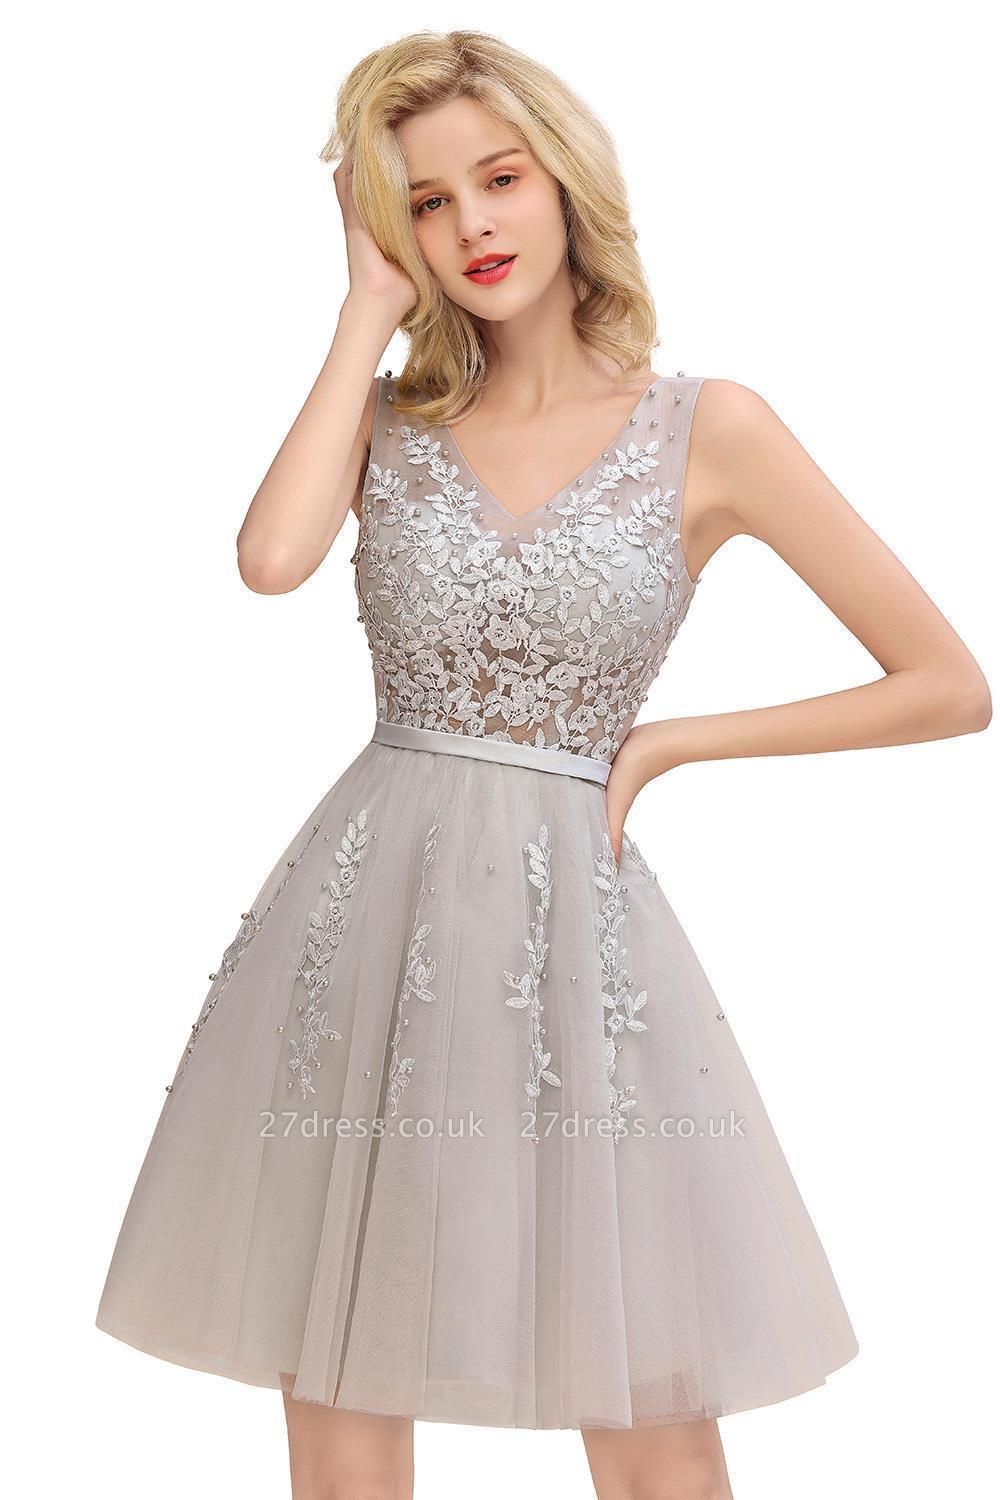 V-neck Lace Homecoming Dresses with Appliques | Short Party Dresses UK Online